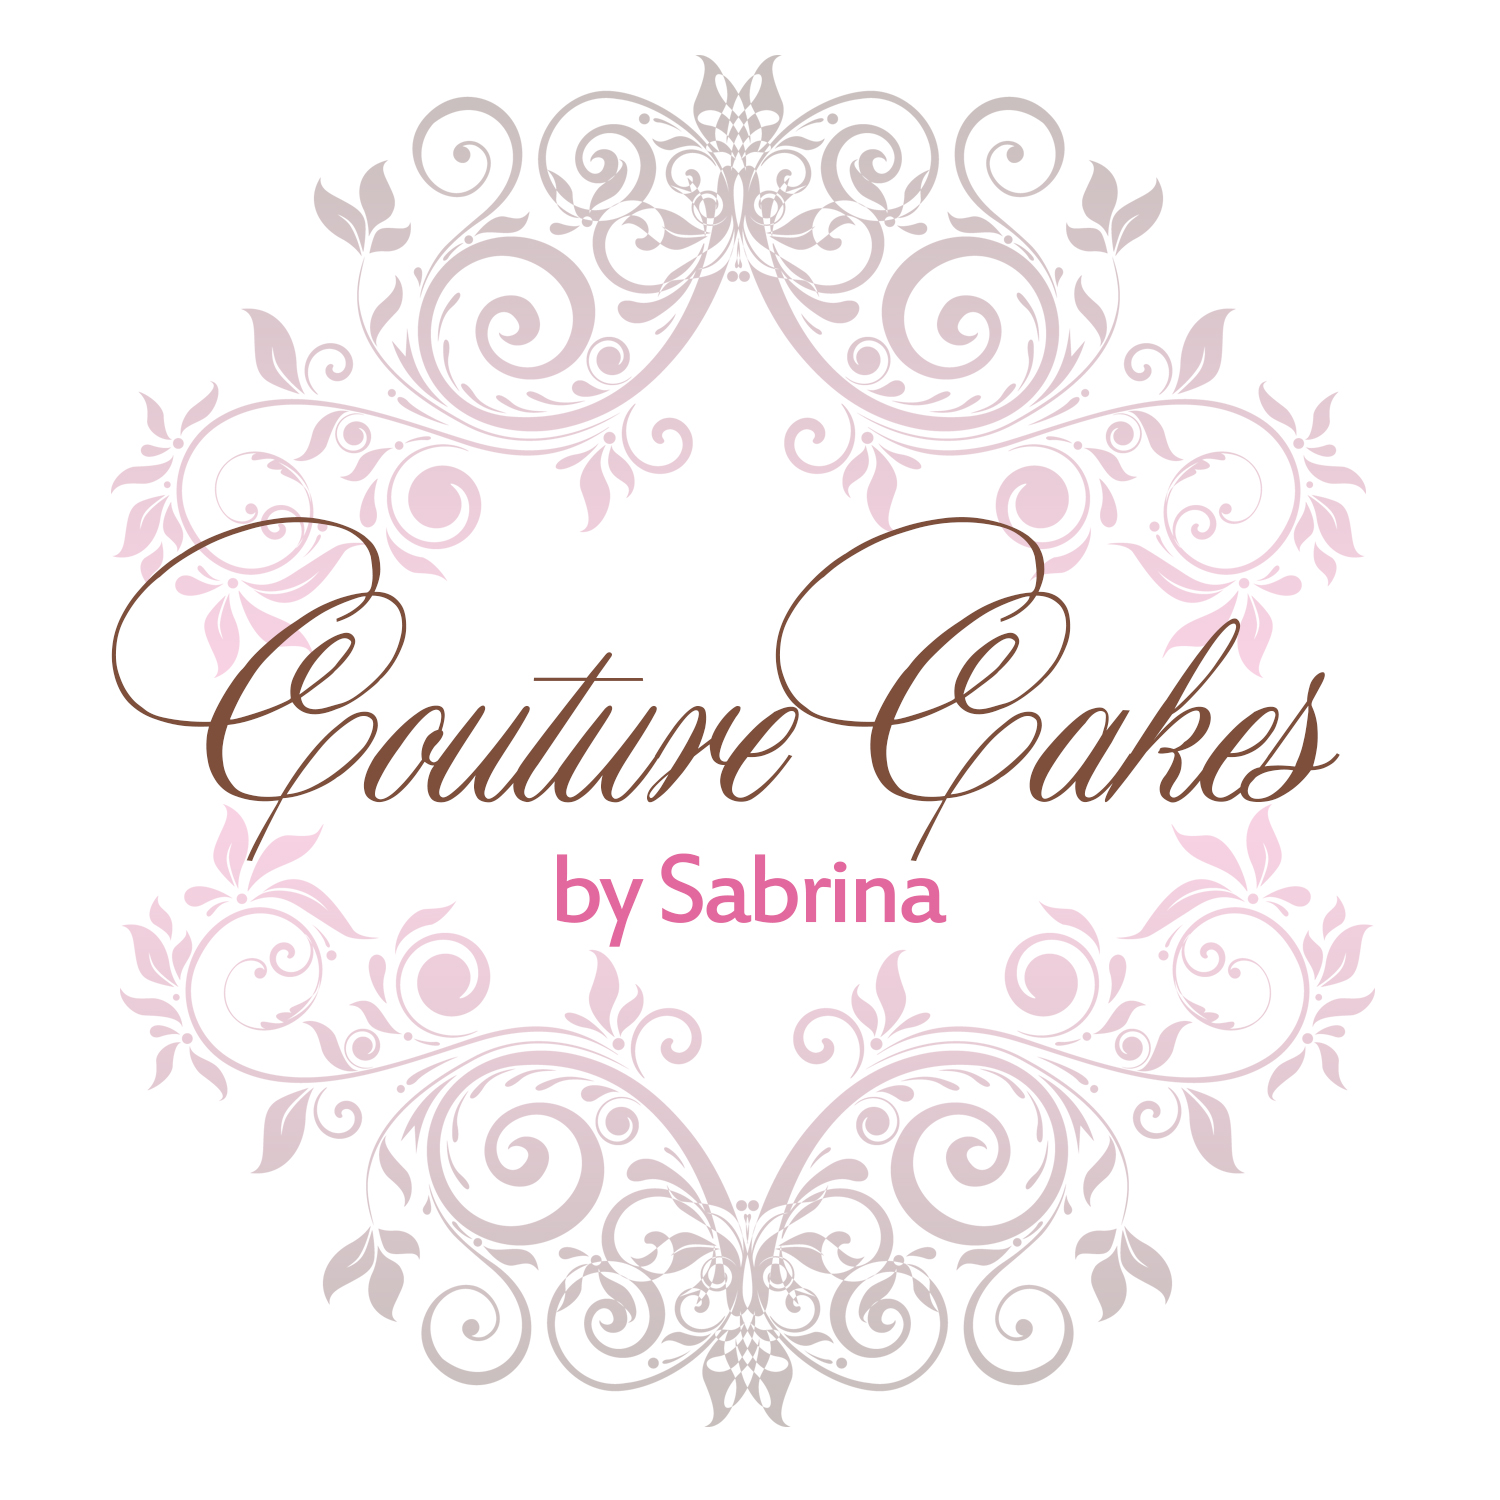 Couture Cakes by Sabrina at Wedding Blueprint: A wedding open house with DC's Top Wedding Professionals. Feb 22 in Alexandria, VA.